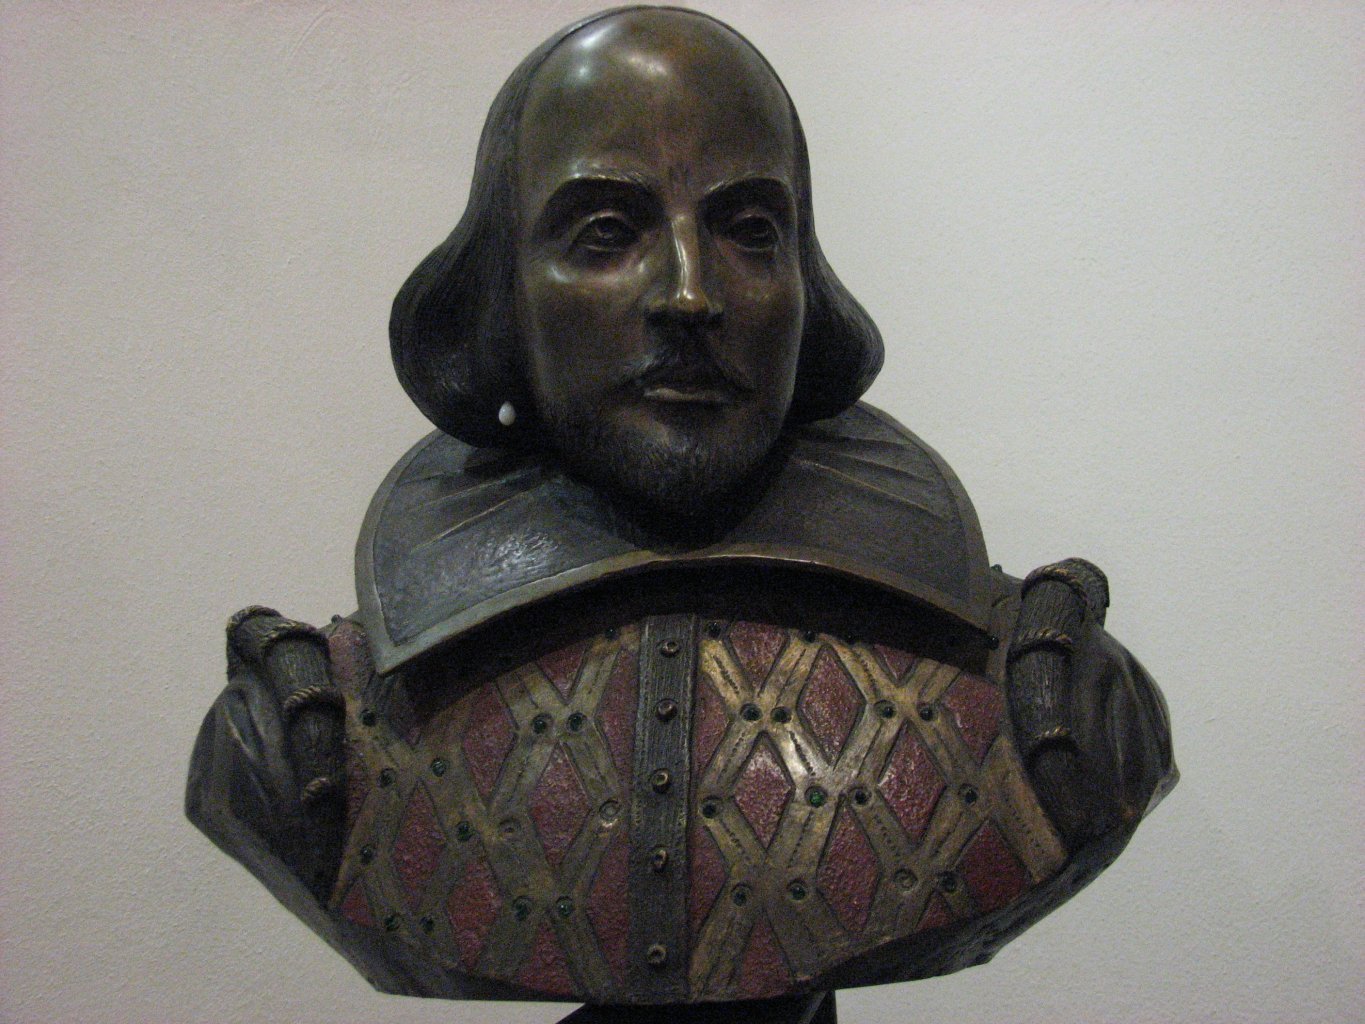 Bust of William Shakespeare in Julia's house in Verona, Italy.